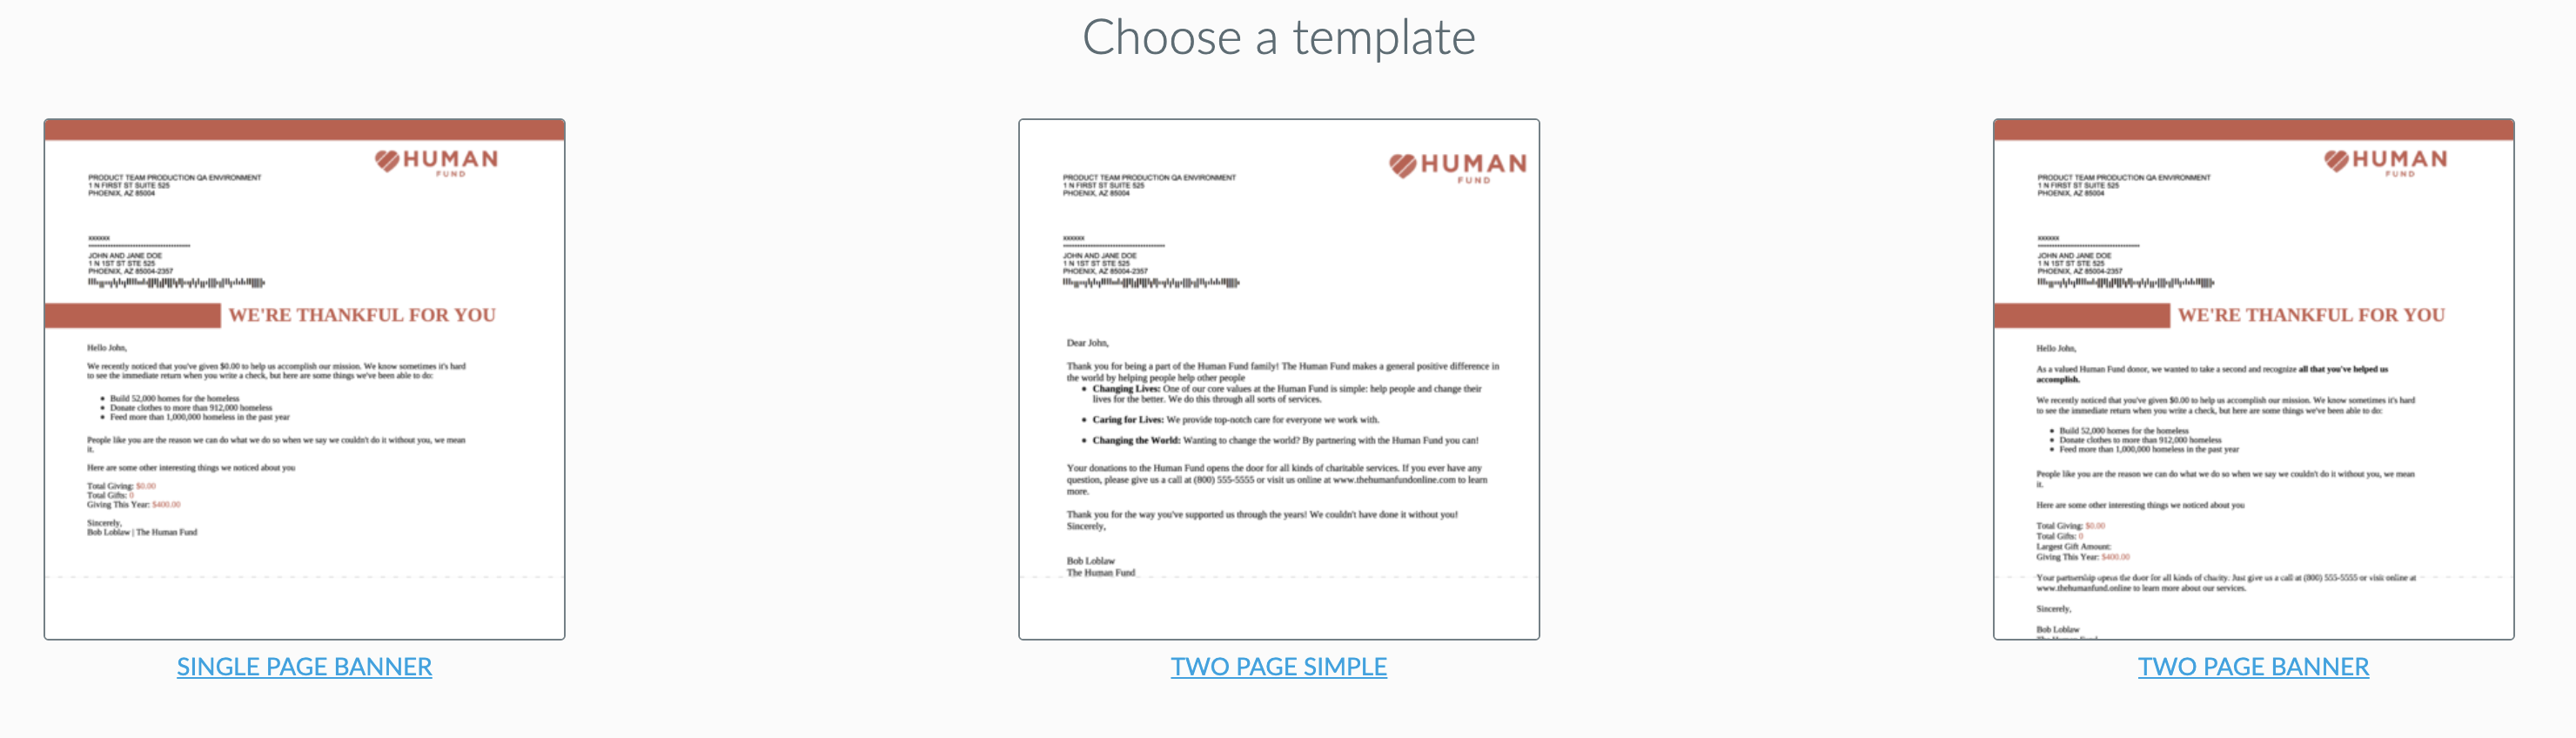 Single_Page_Letter_Templates.png